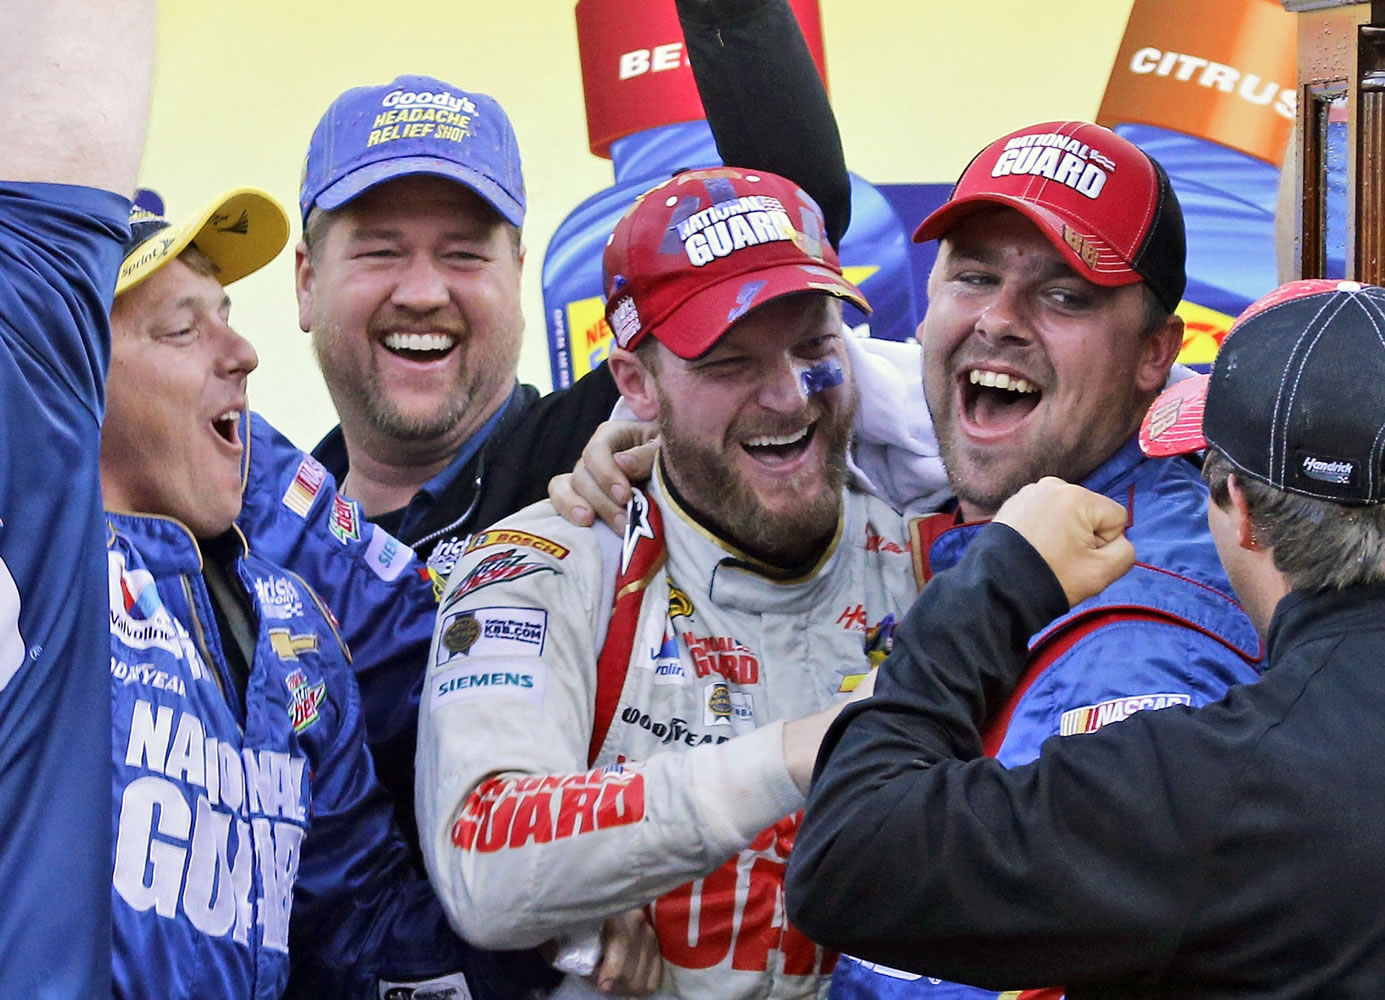 Dale Earnhardt Jr., center, celebrates with his pit crew after winning the NASCAR Sprint Cup Series auto race at Martinsville Speedway in Martinsville, Va., Sunday, Oct. 26, 2014.